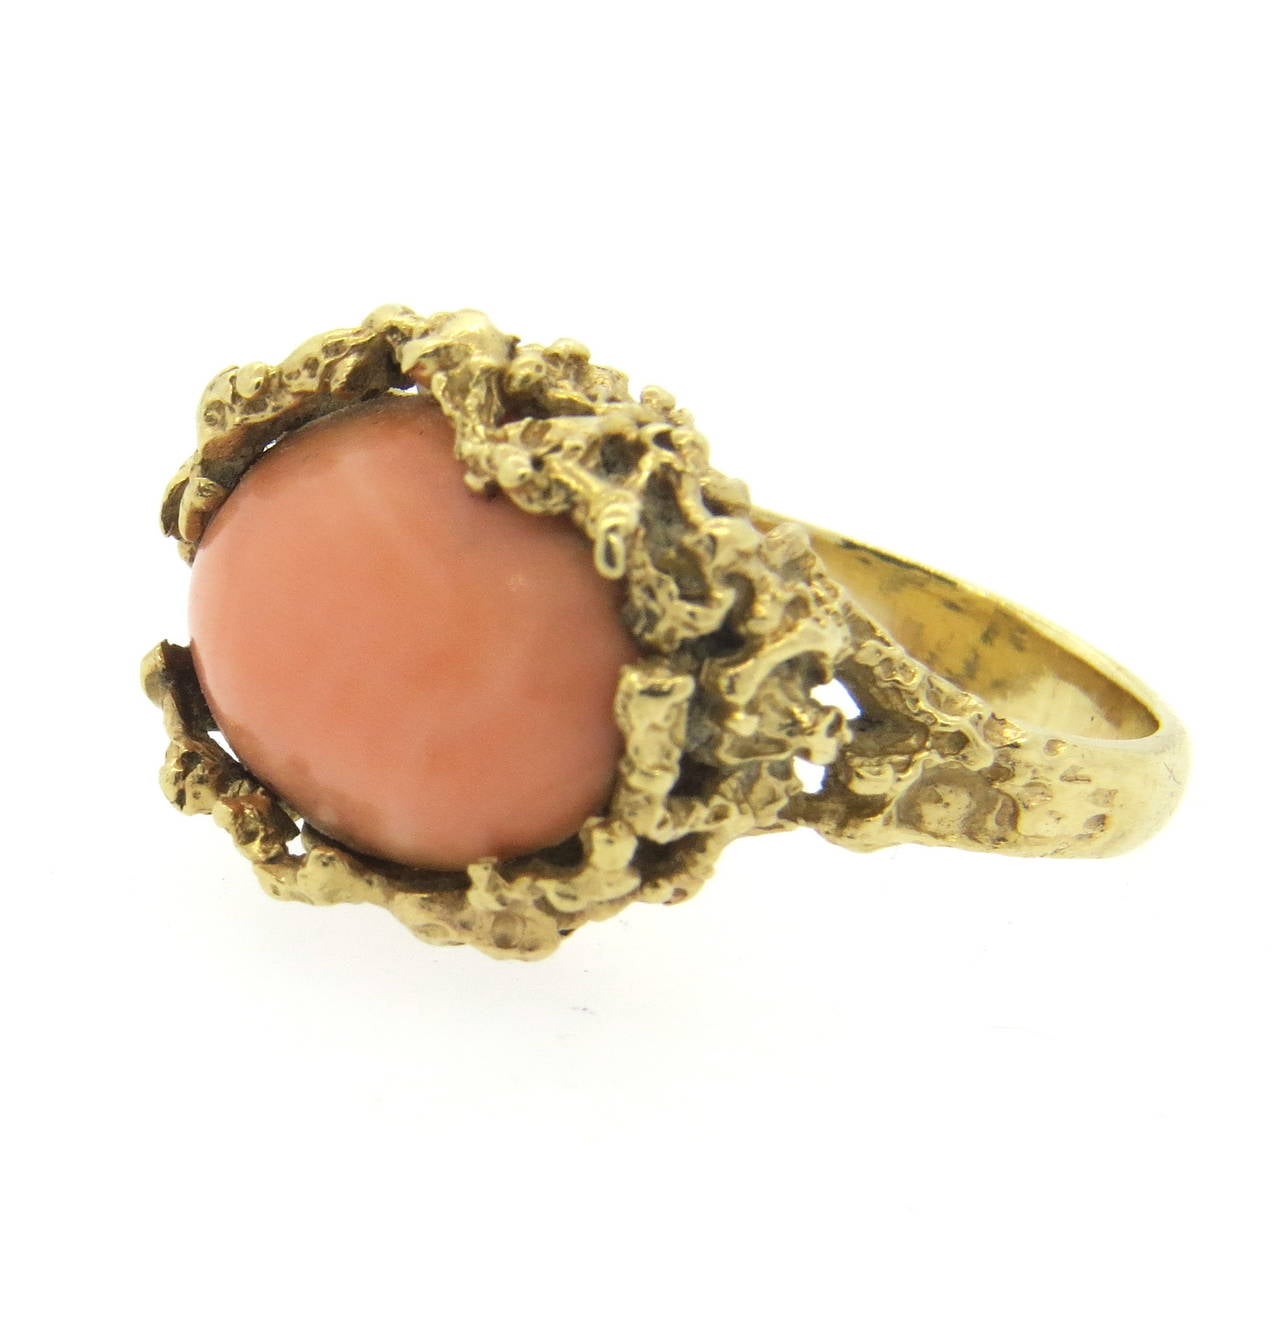 A 14k yellow gold ring set with an angel skin coral.  Crafted in the 1970s the ring is a size 7.5 and sits 11.3mm from the finger.  The top of the ring measures 22.5mm x 18.2mm.  The weight of the ring is 12.8 grams.